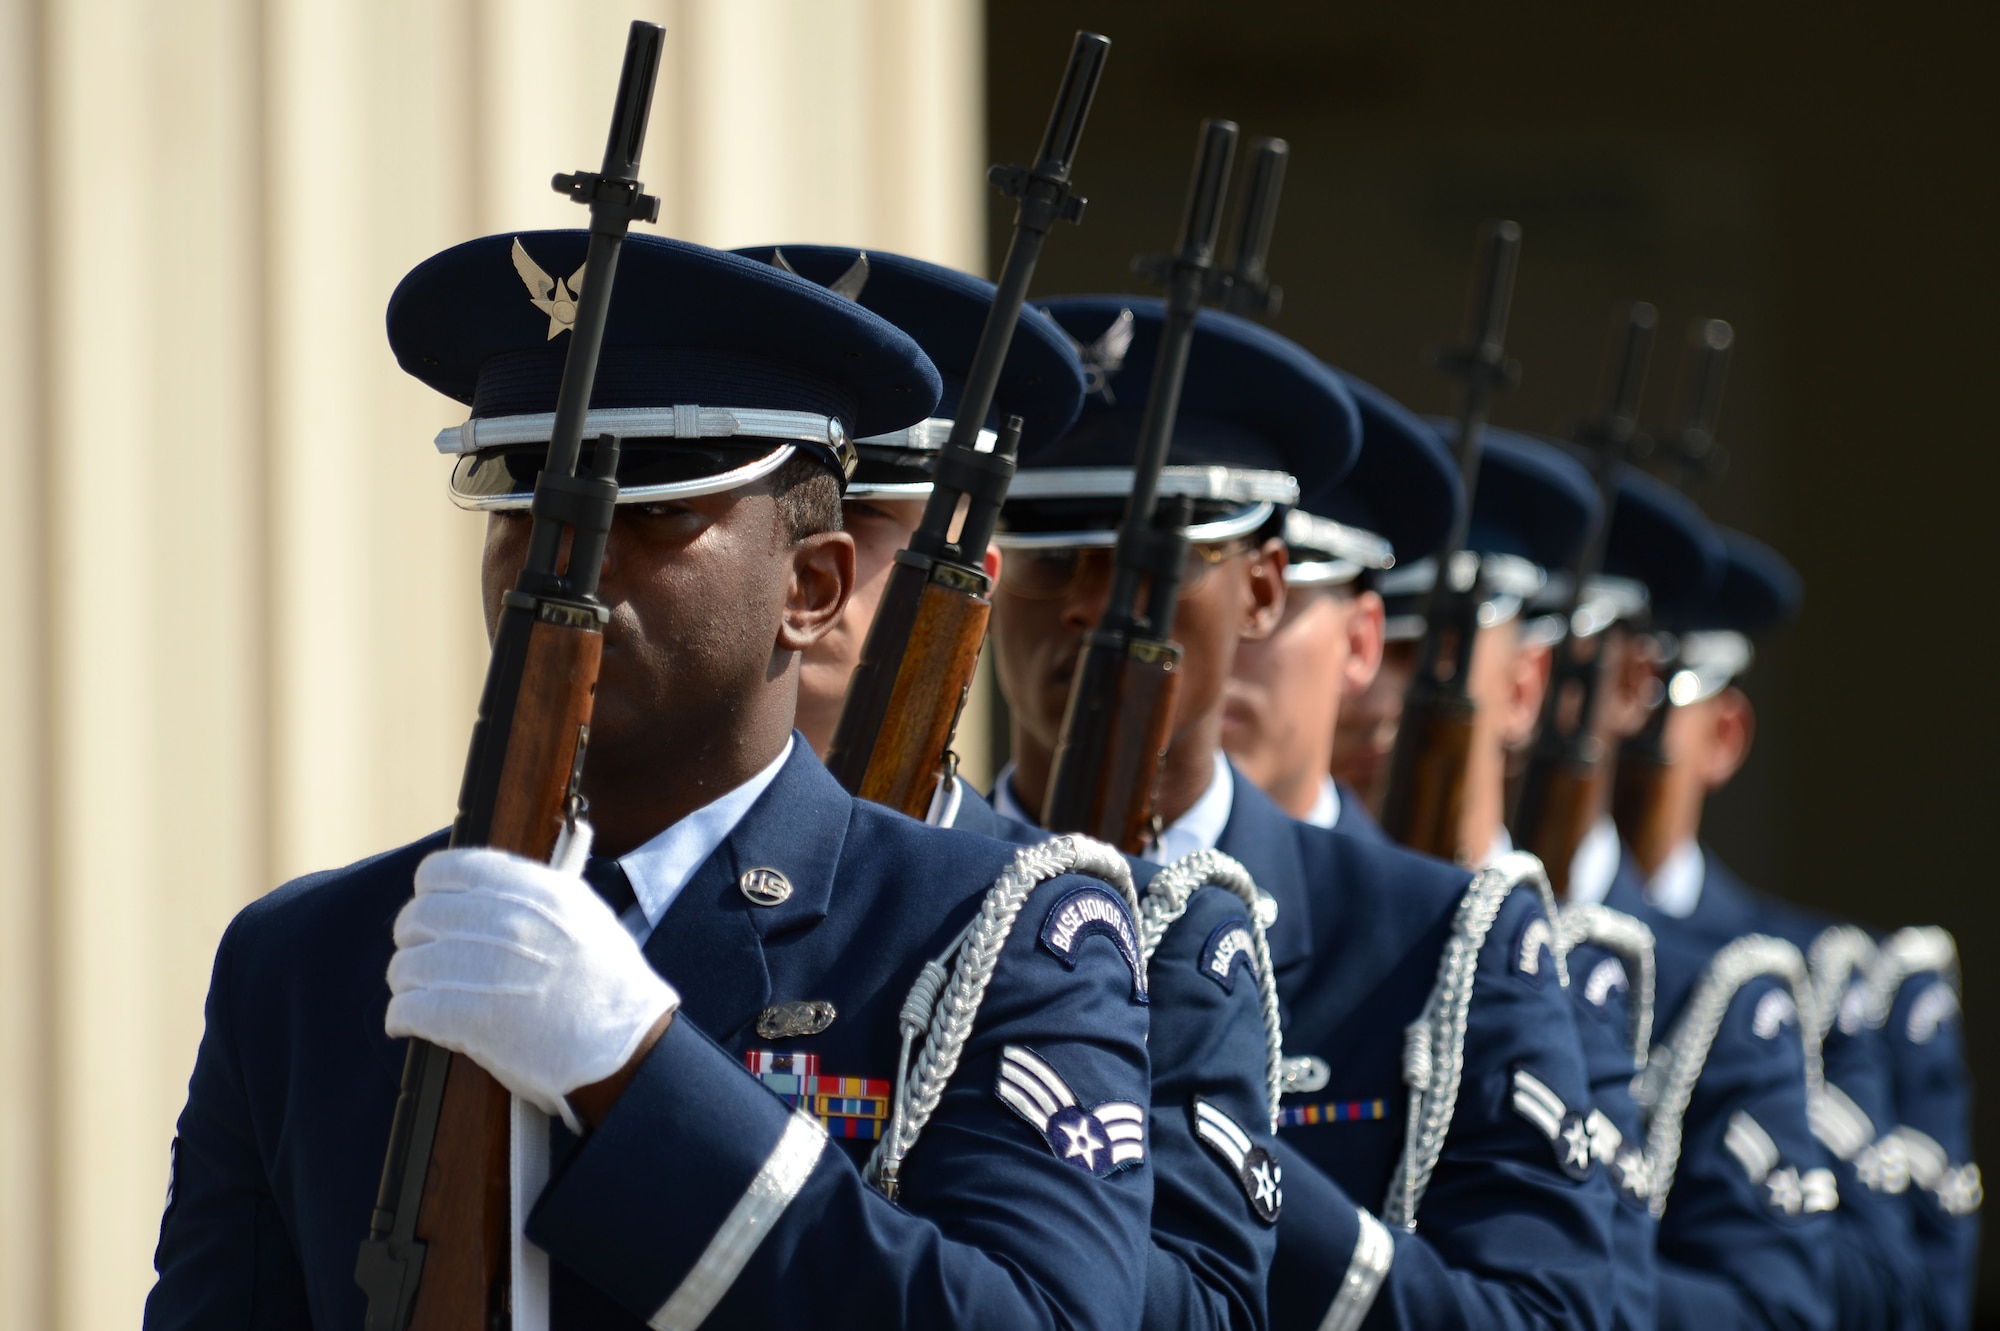 U.S. Airmen assigned to the 20th Force Support Squadron Honor Guard fall in line before performing a firing party ceremonial procedure at Shaw Air Force Base, S.C., June 17, 2016. Honor guardsmen perform numerous details on base to include retirements, changes of command, and promotion ceremony details. (U.S. Air Force photo by Airman 1st Class Christopher Maldonado)